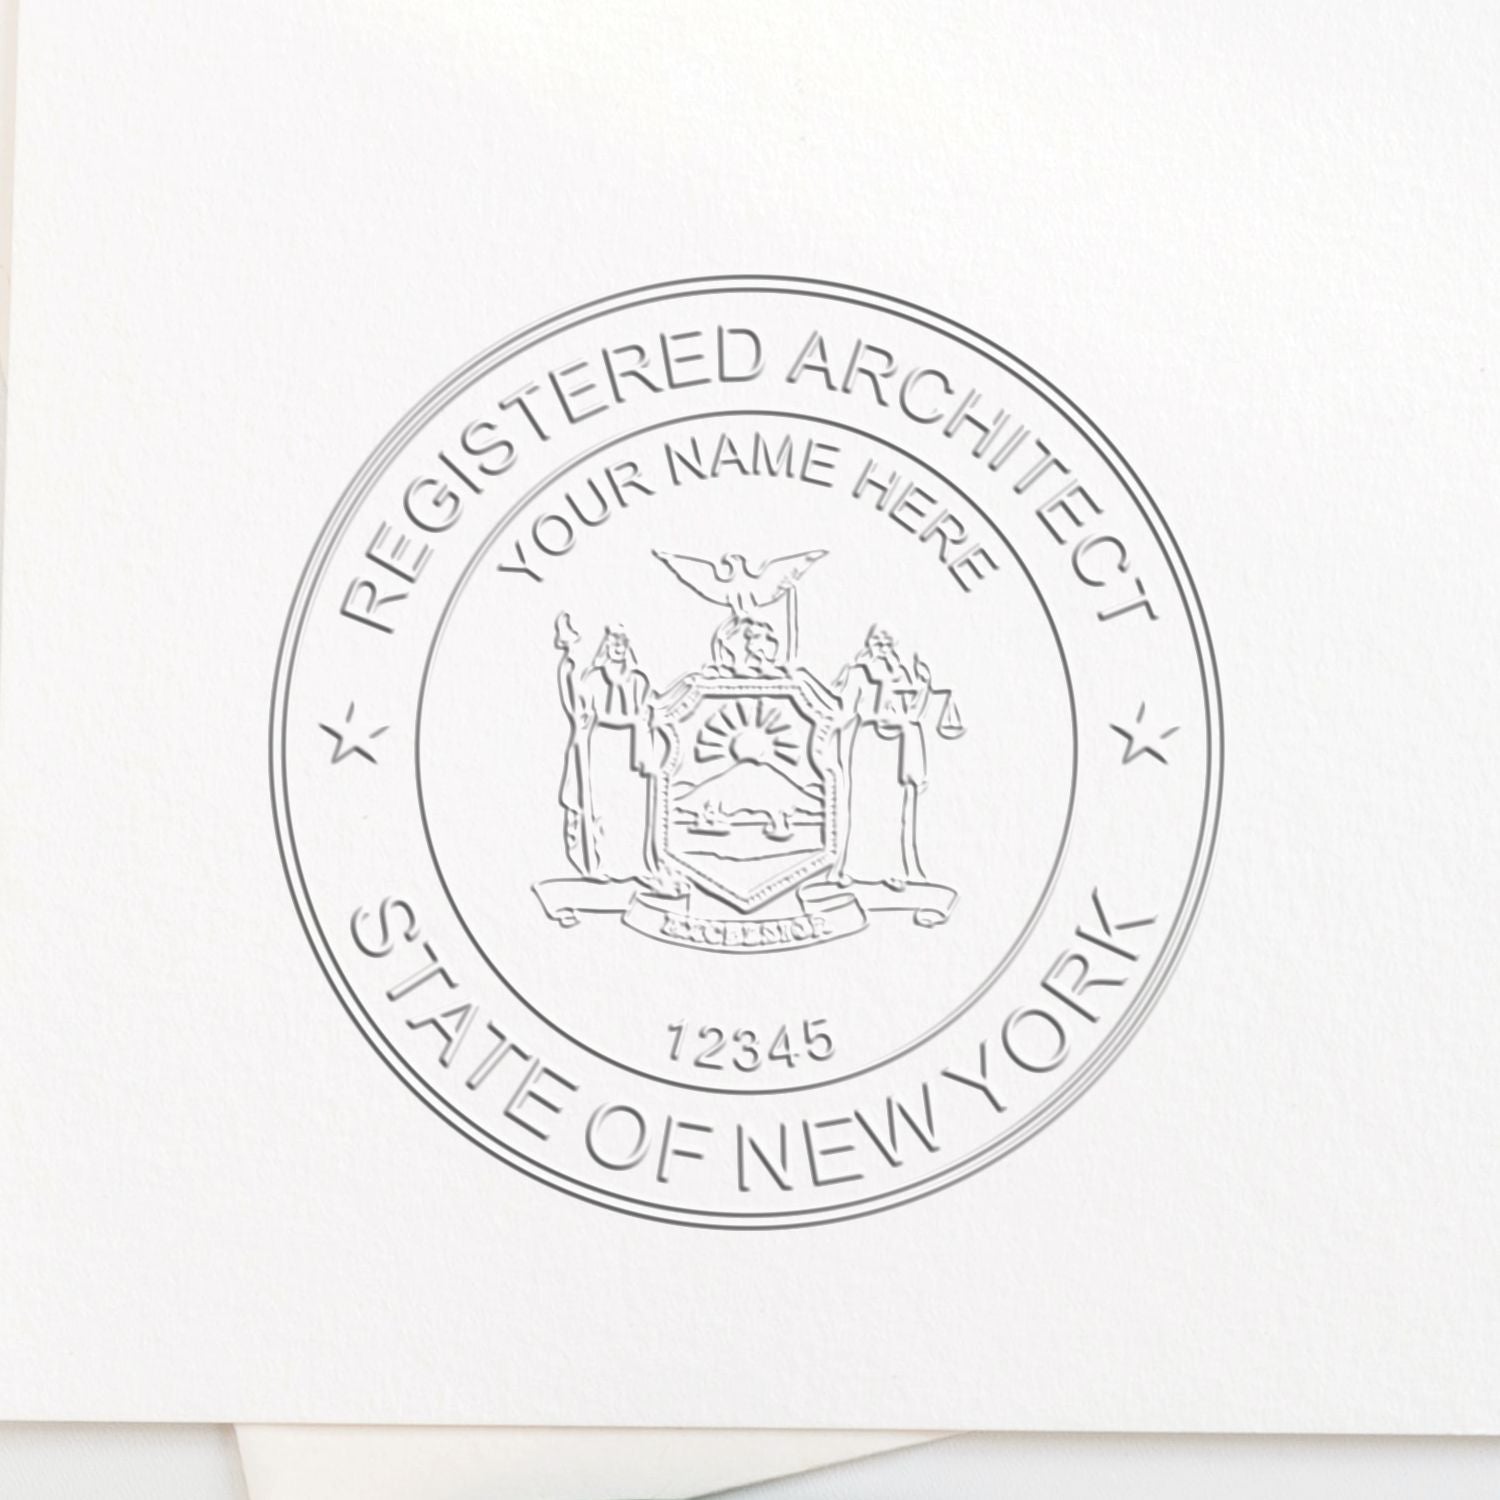 The main image for the New York Desk Architect Embossing Seal depicting a sample of the imprint and electronic files